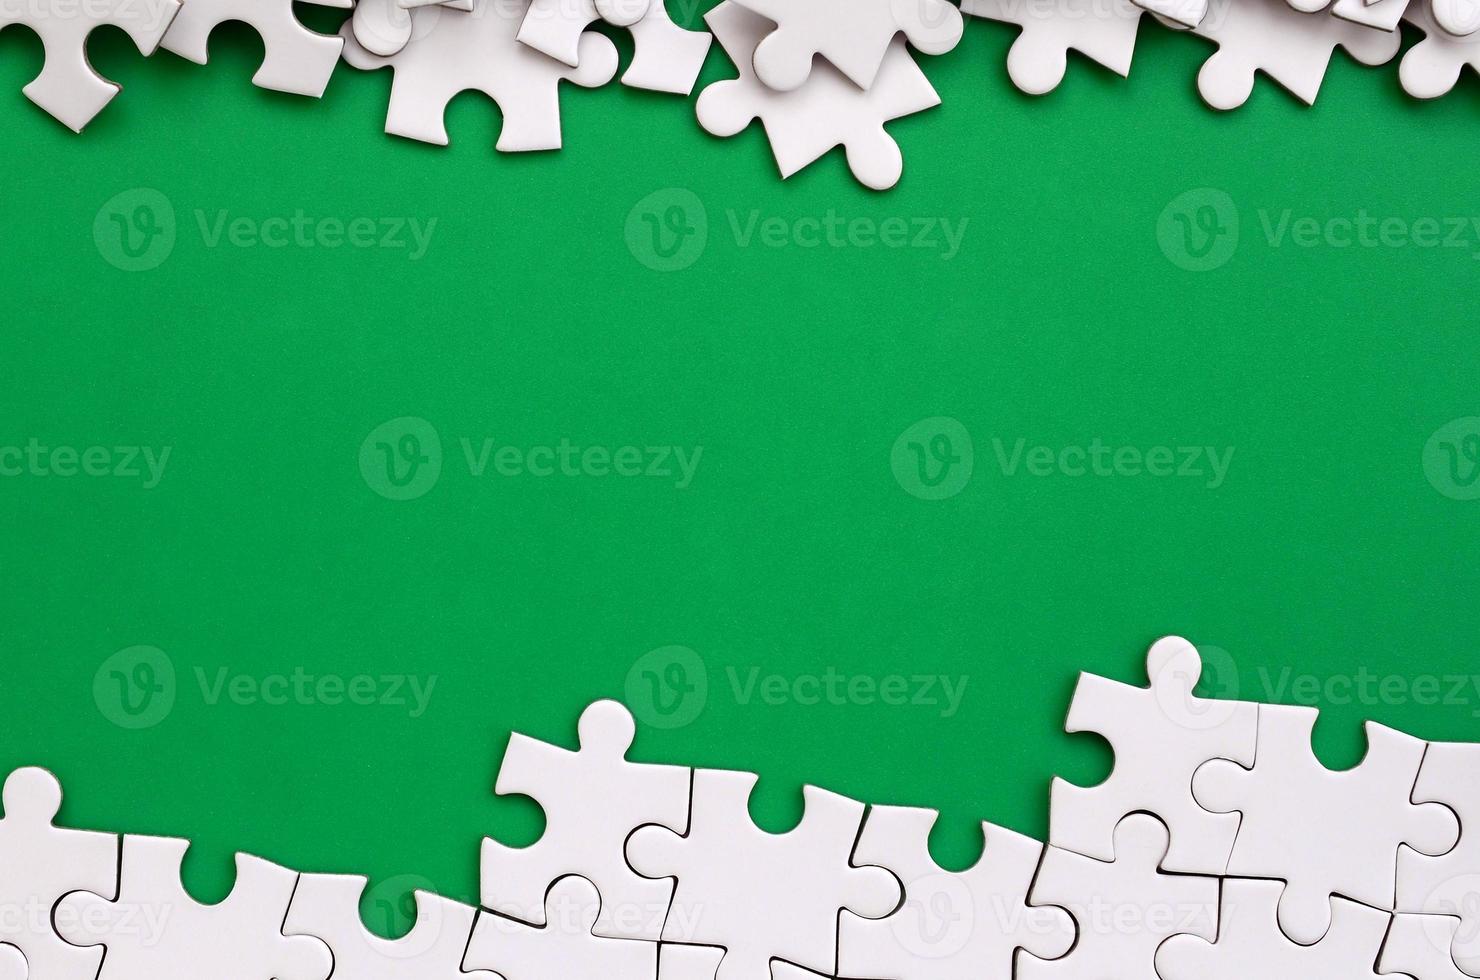 Fragment of a folded white jigsaw puzzle and a pile of uncombed puzzle elements against the background of a green surface. Texture photo with space for text